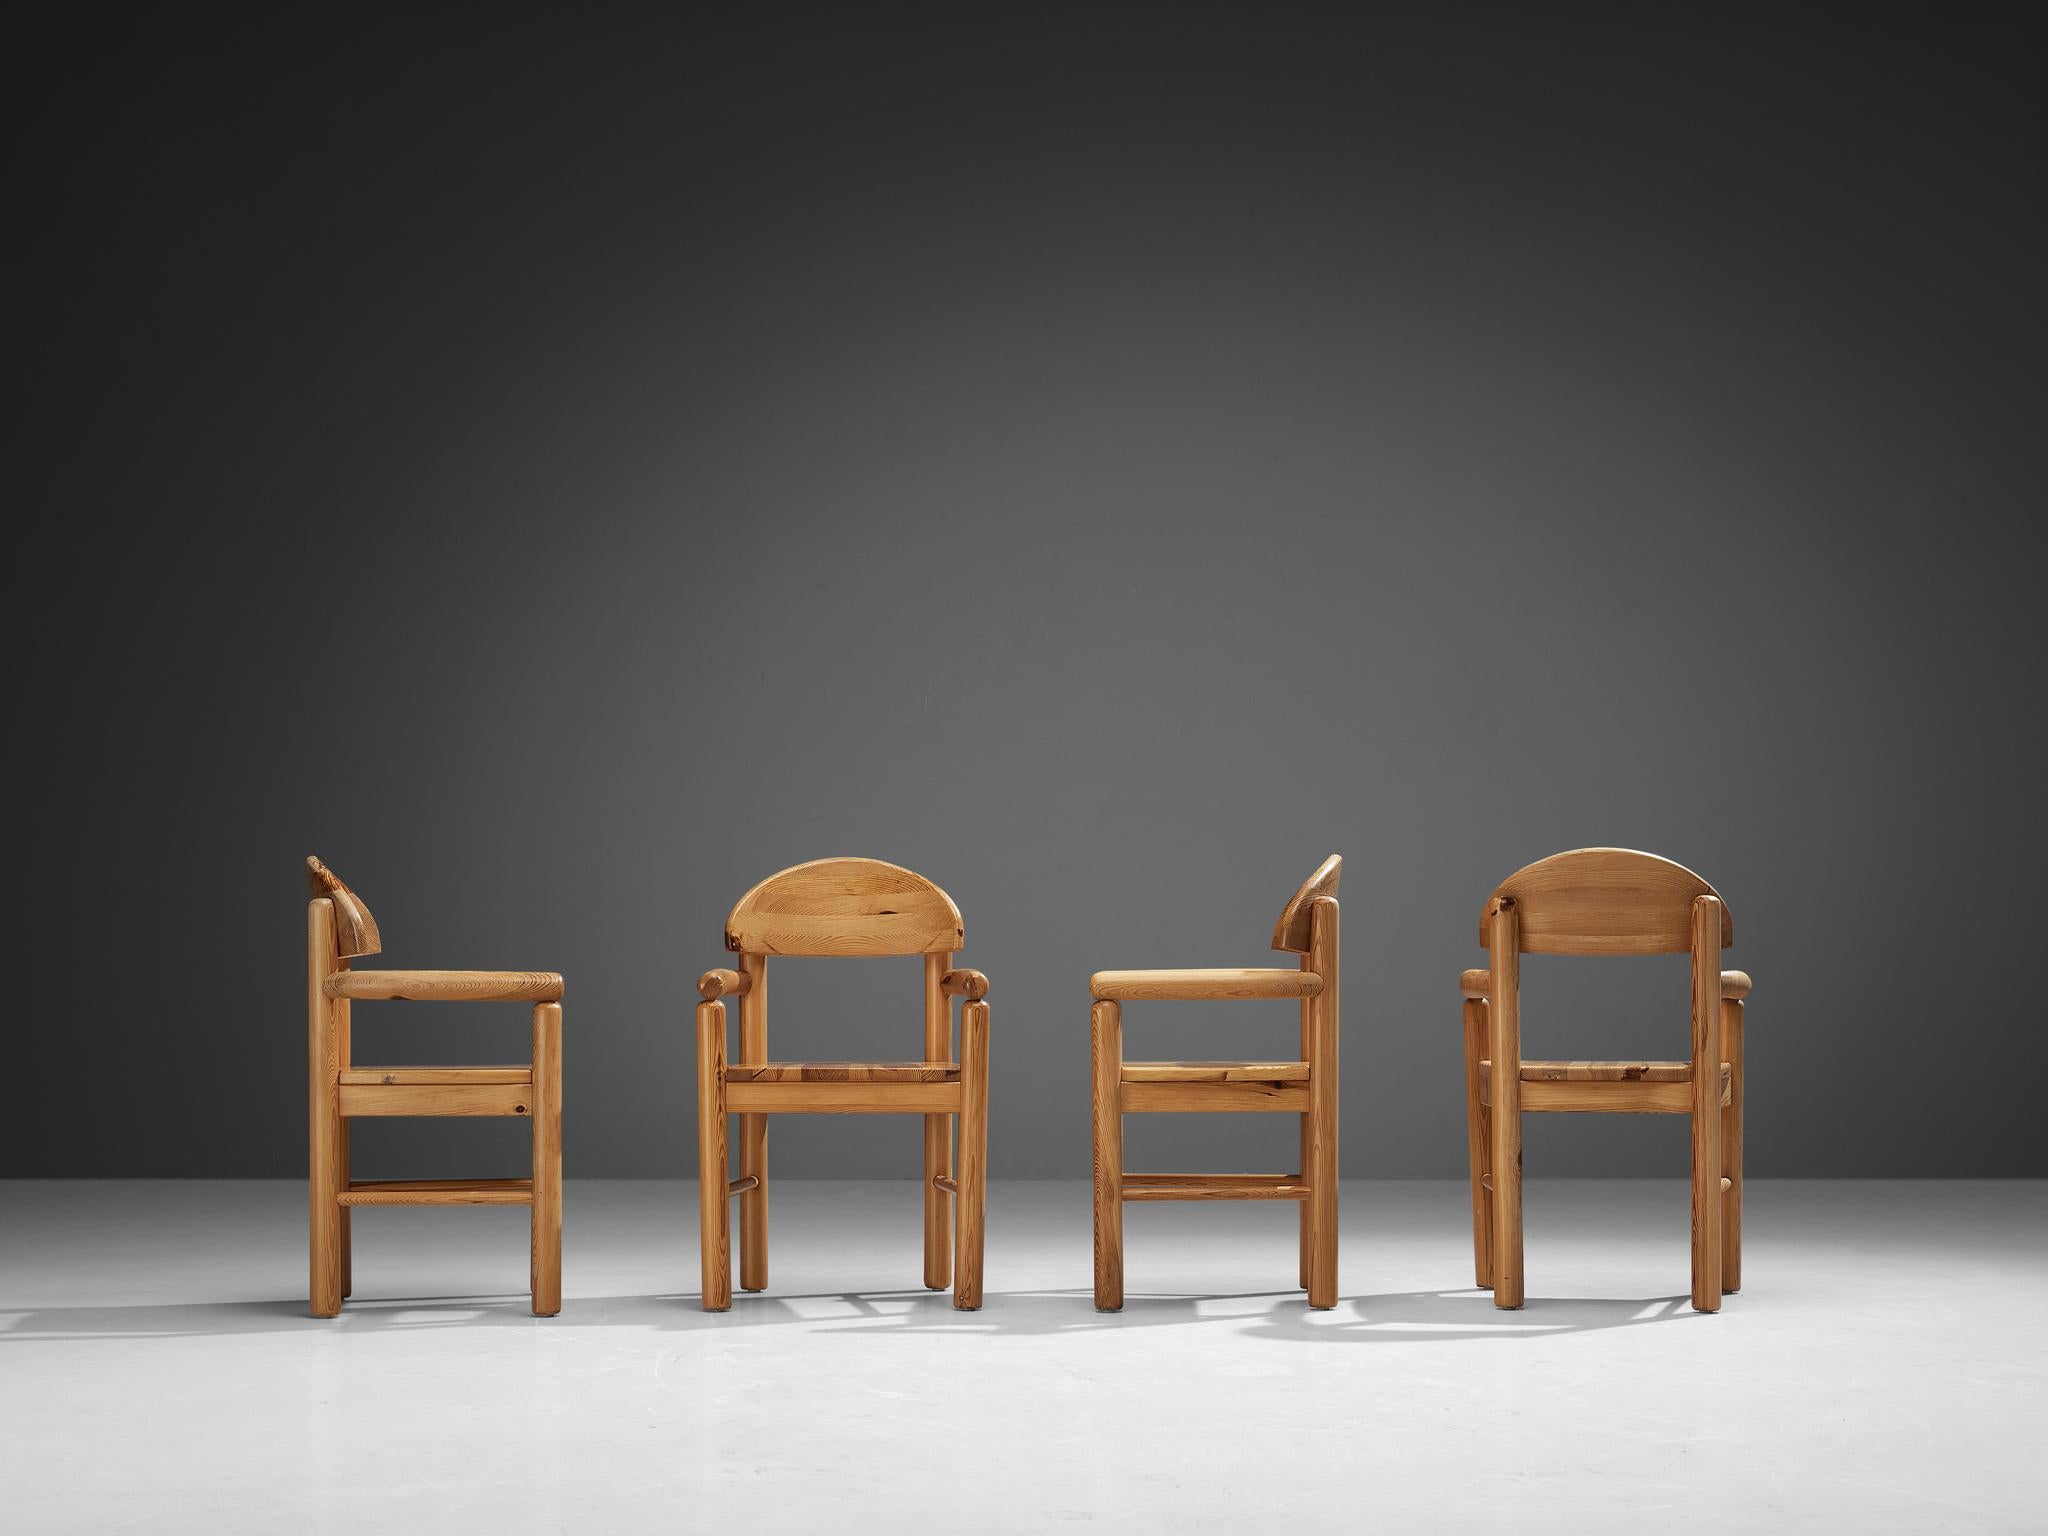 Rainer Daumiller for Hirtshals Sawmill, set of four dining chairs, pine, Denmark, 1970s

This set of armchairs by Danish designer Rainer Daumiller has multiple features. The vivid grain of the warm pine wood contributes to the natural